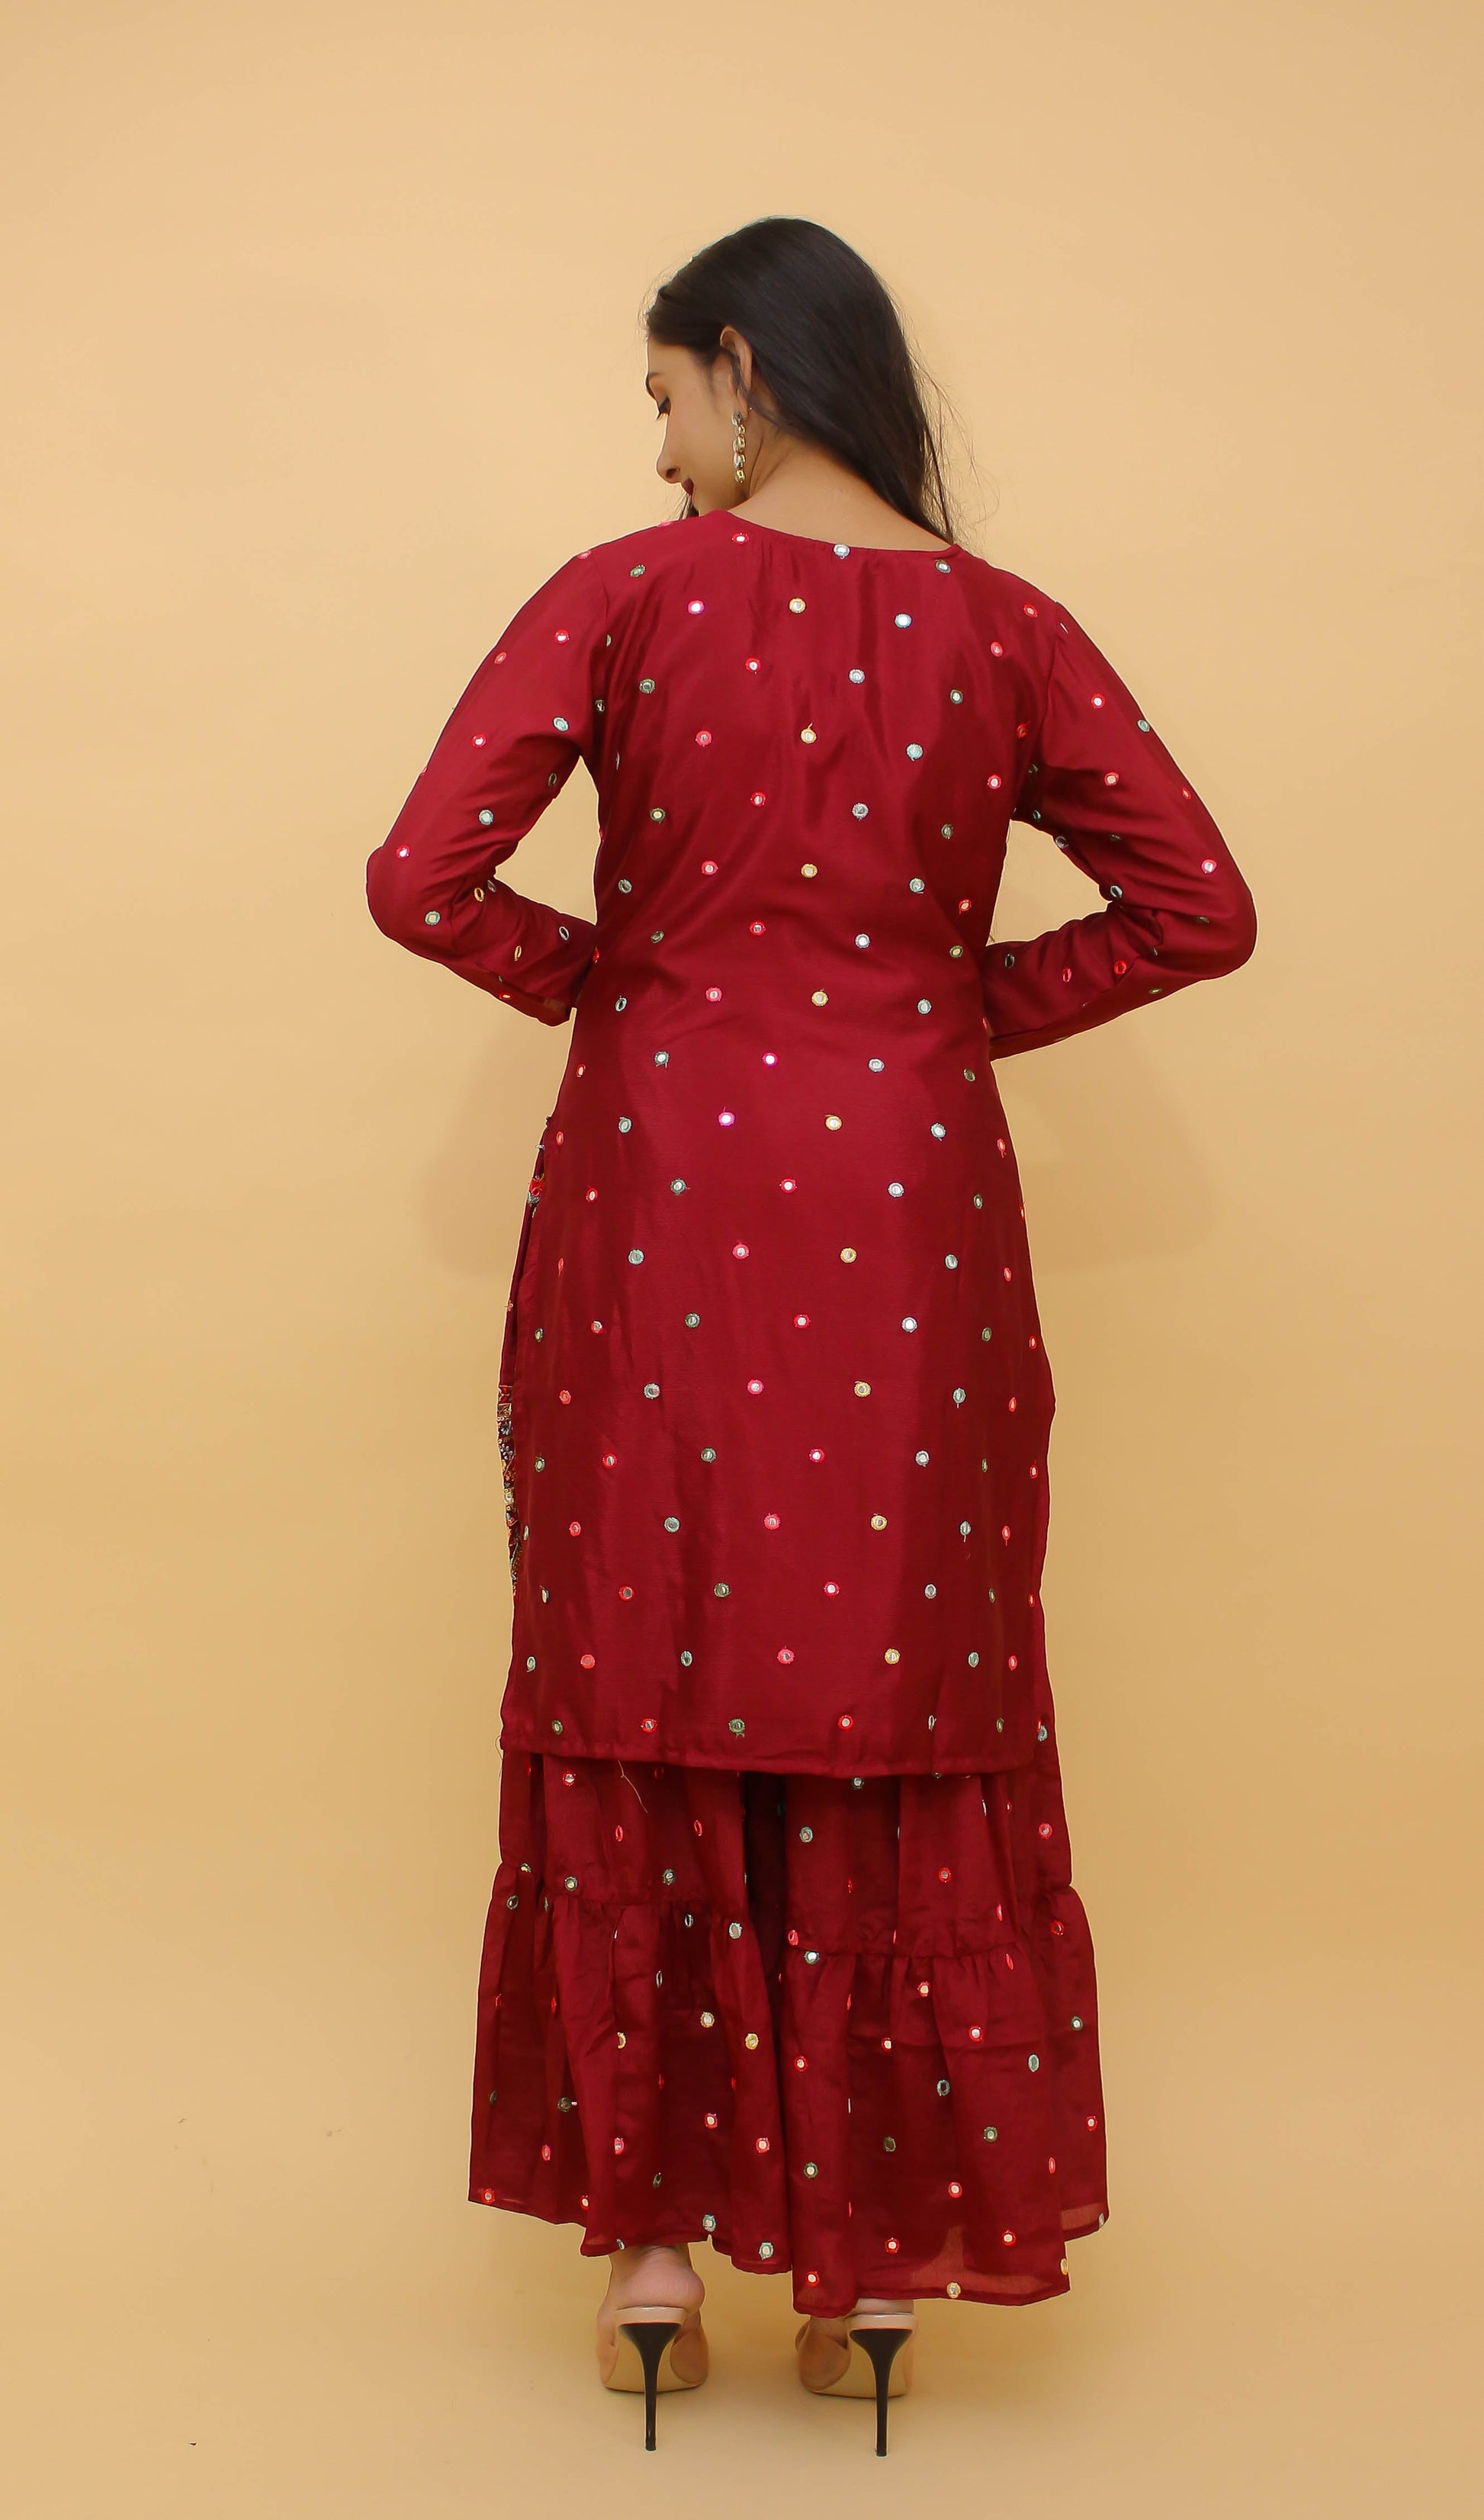 Maroon Pakistani Georgette Plazo Suit For Indian Festival & Weddings - Sequence Embroidery Work, Thread Embroidery Work, Foil Mirror Work,